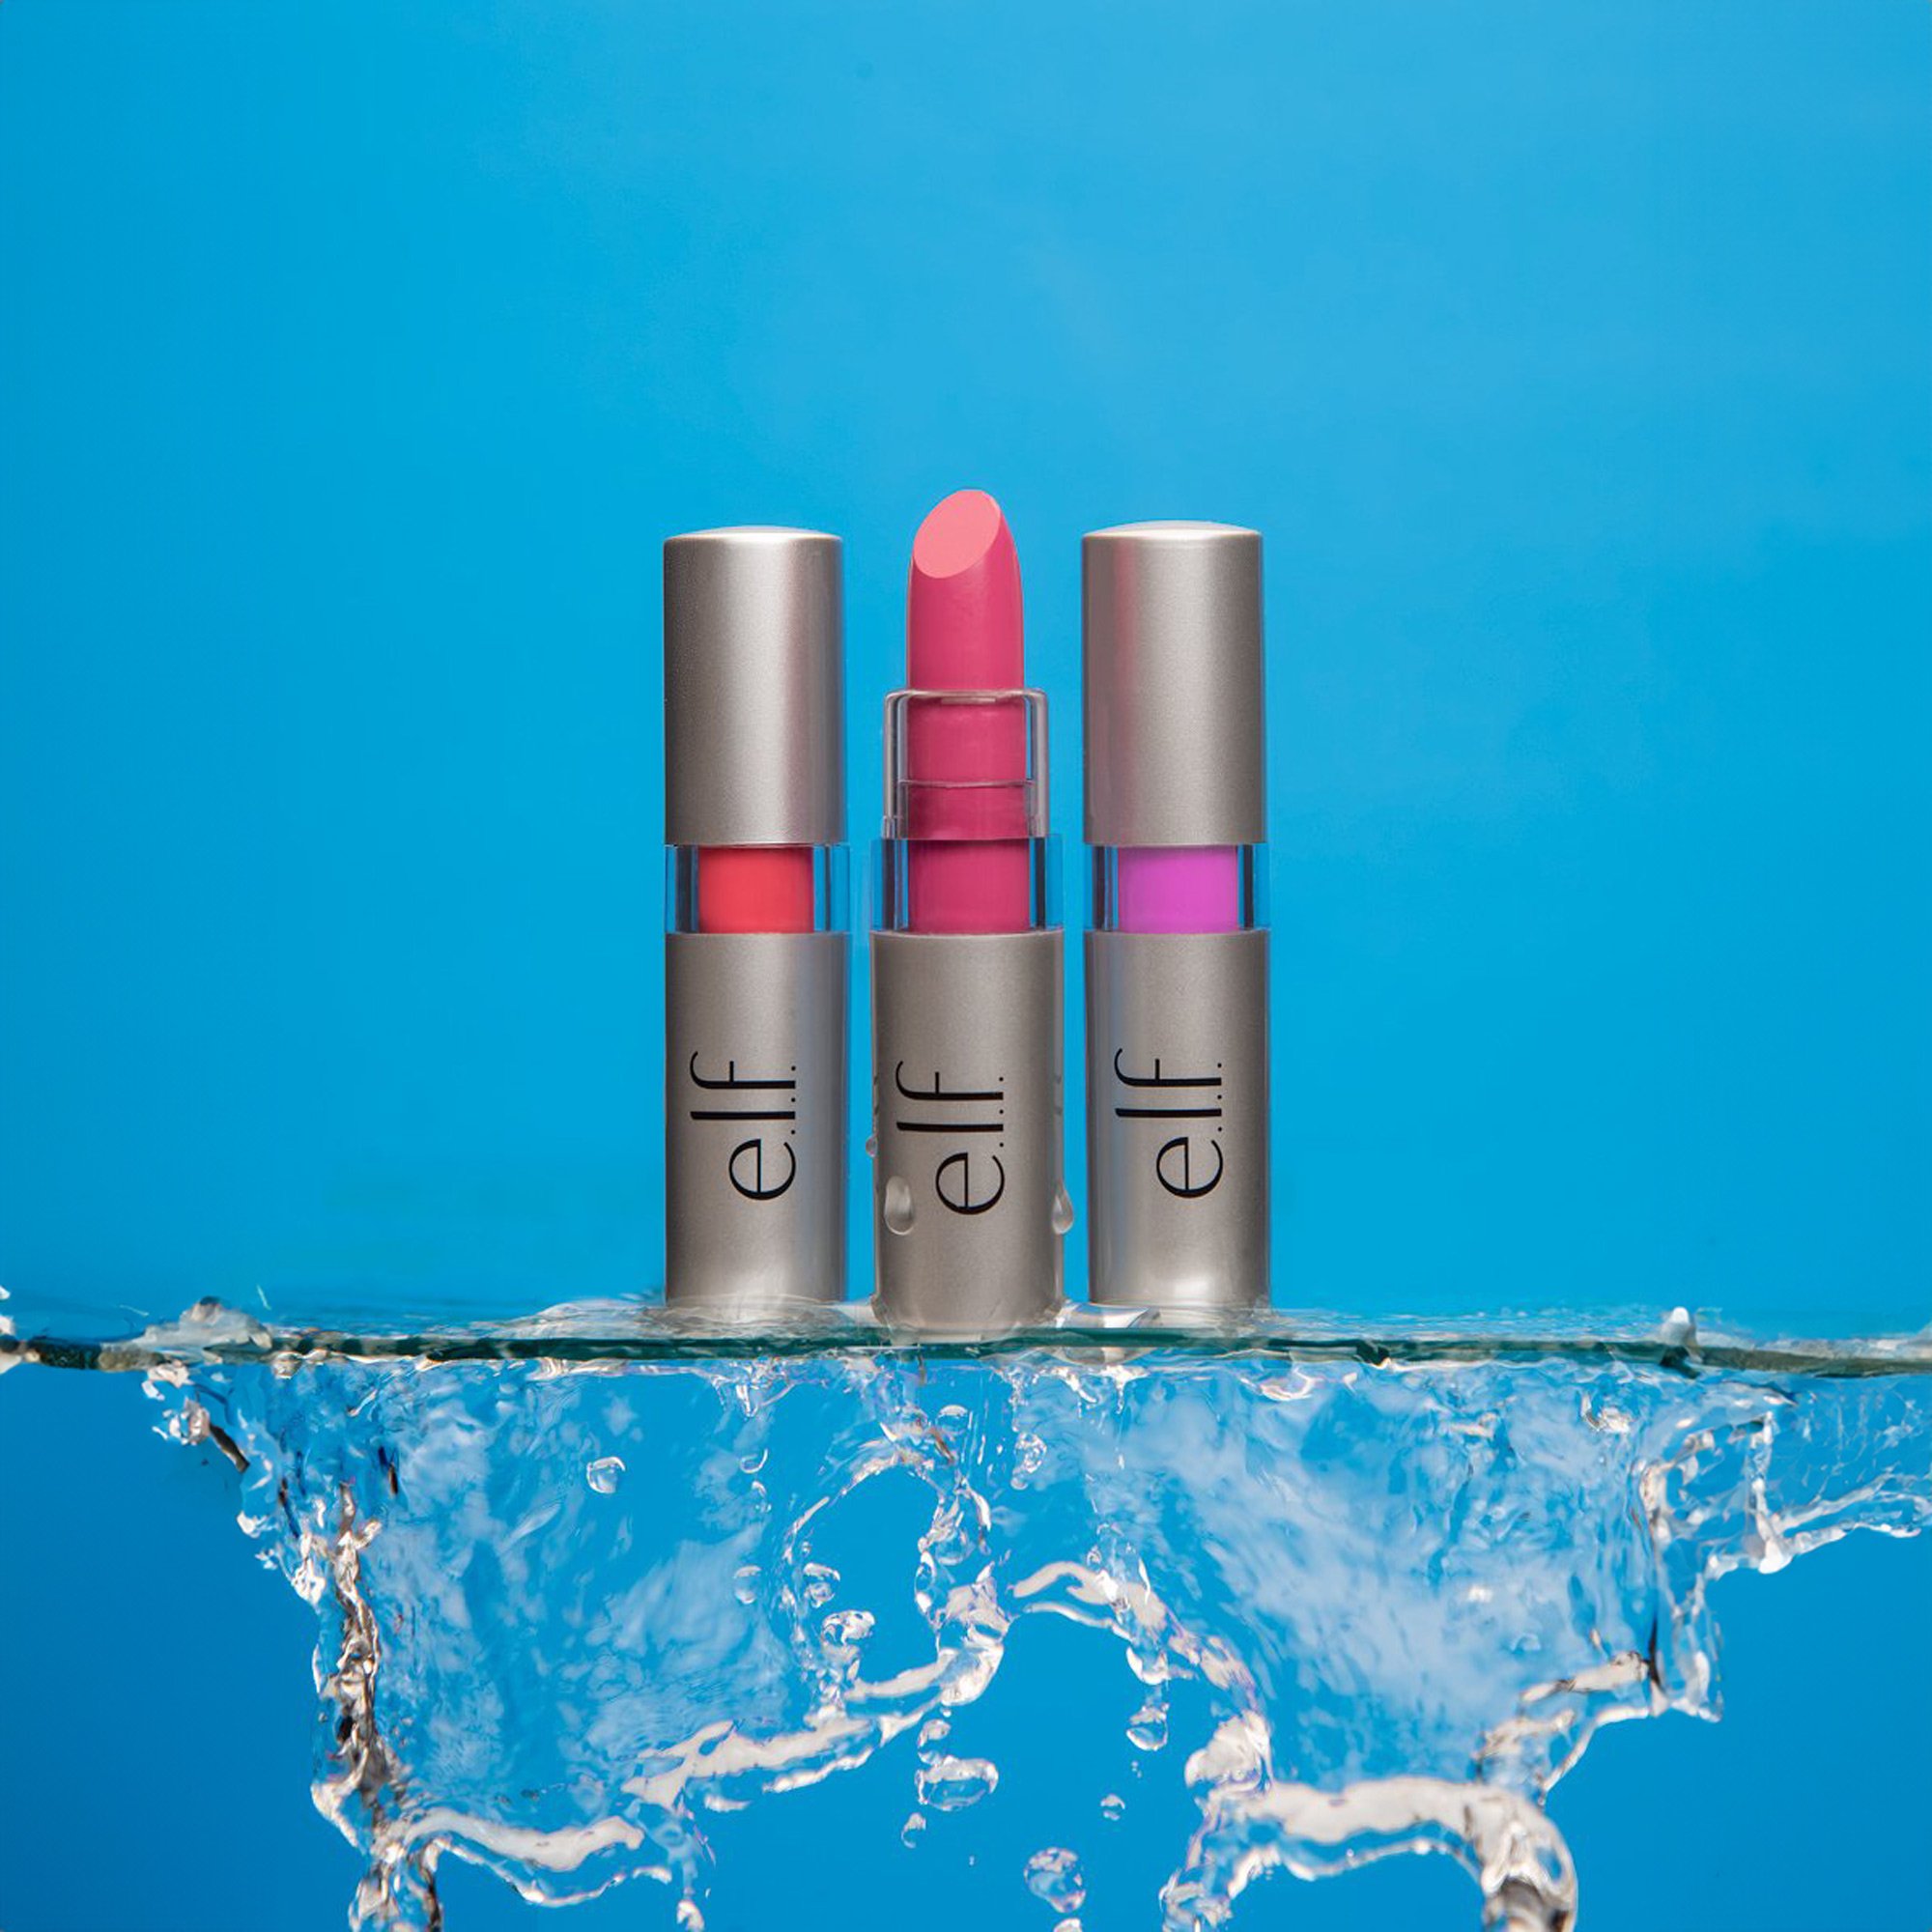  lipstick on a glass shelf with water flowing off the edge against a light blue background 